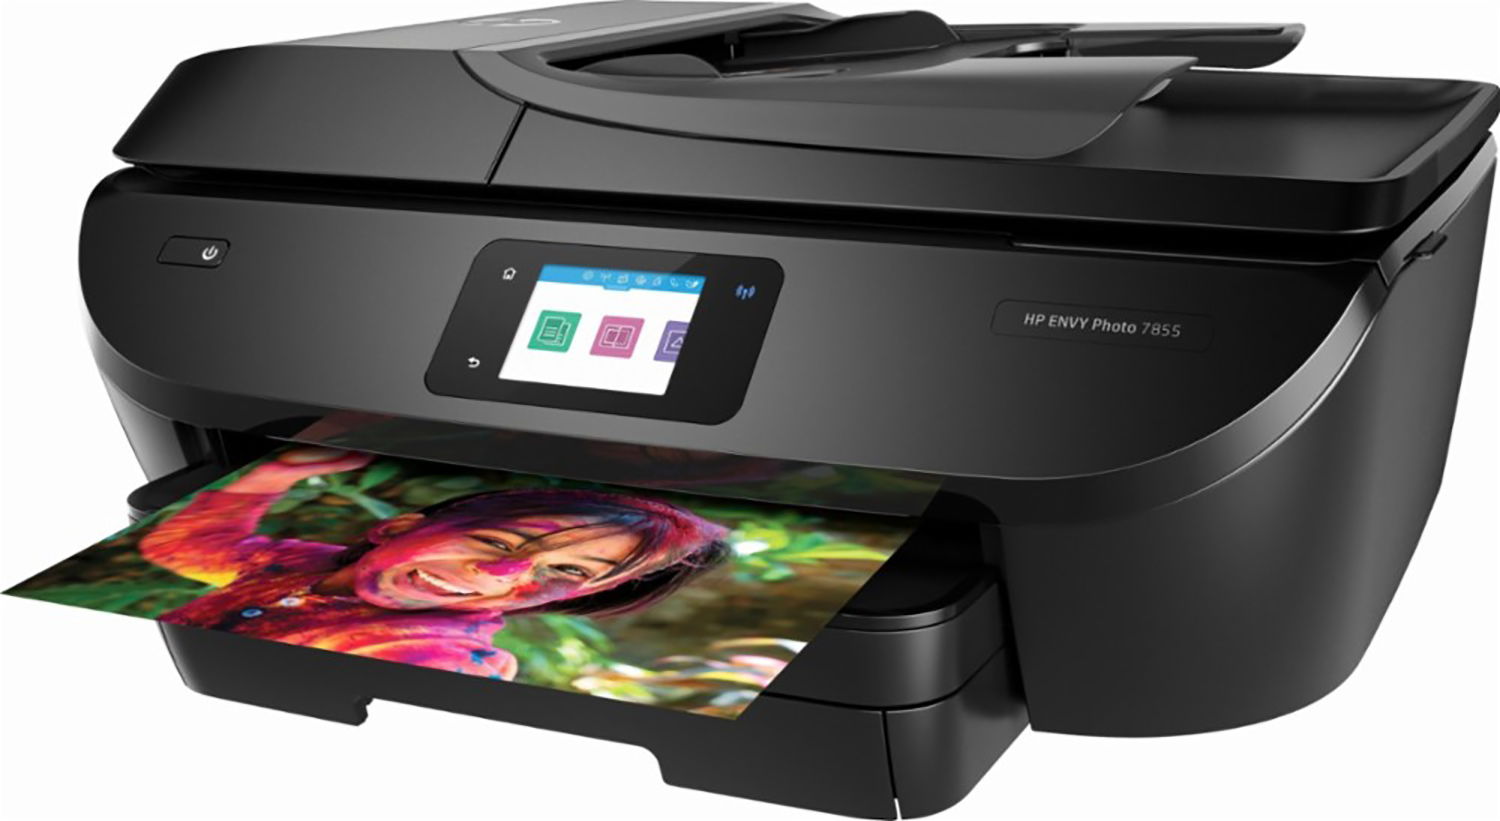 hp-envy-7855-printer-review-versatile-document-and-photo-printing-at